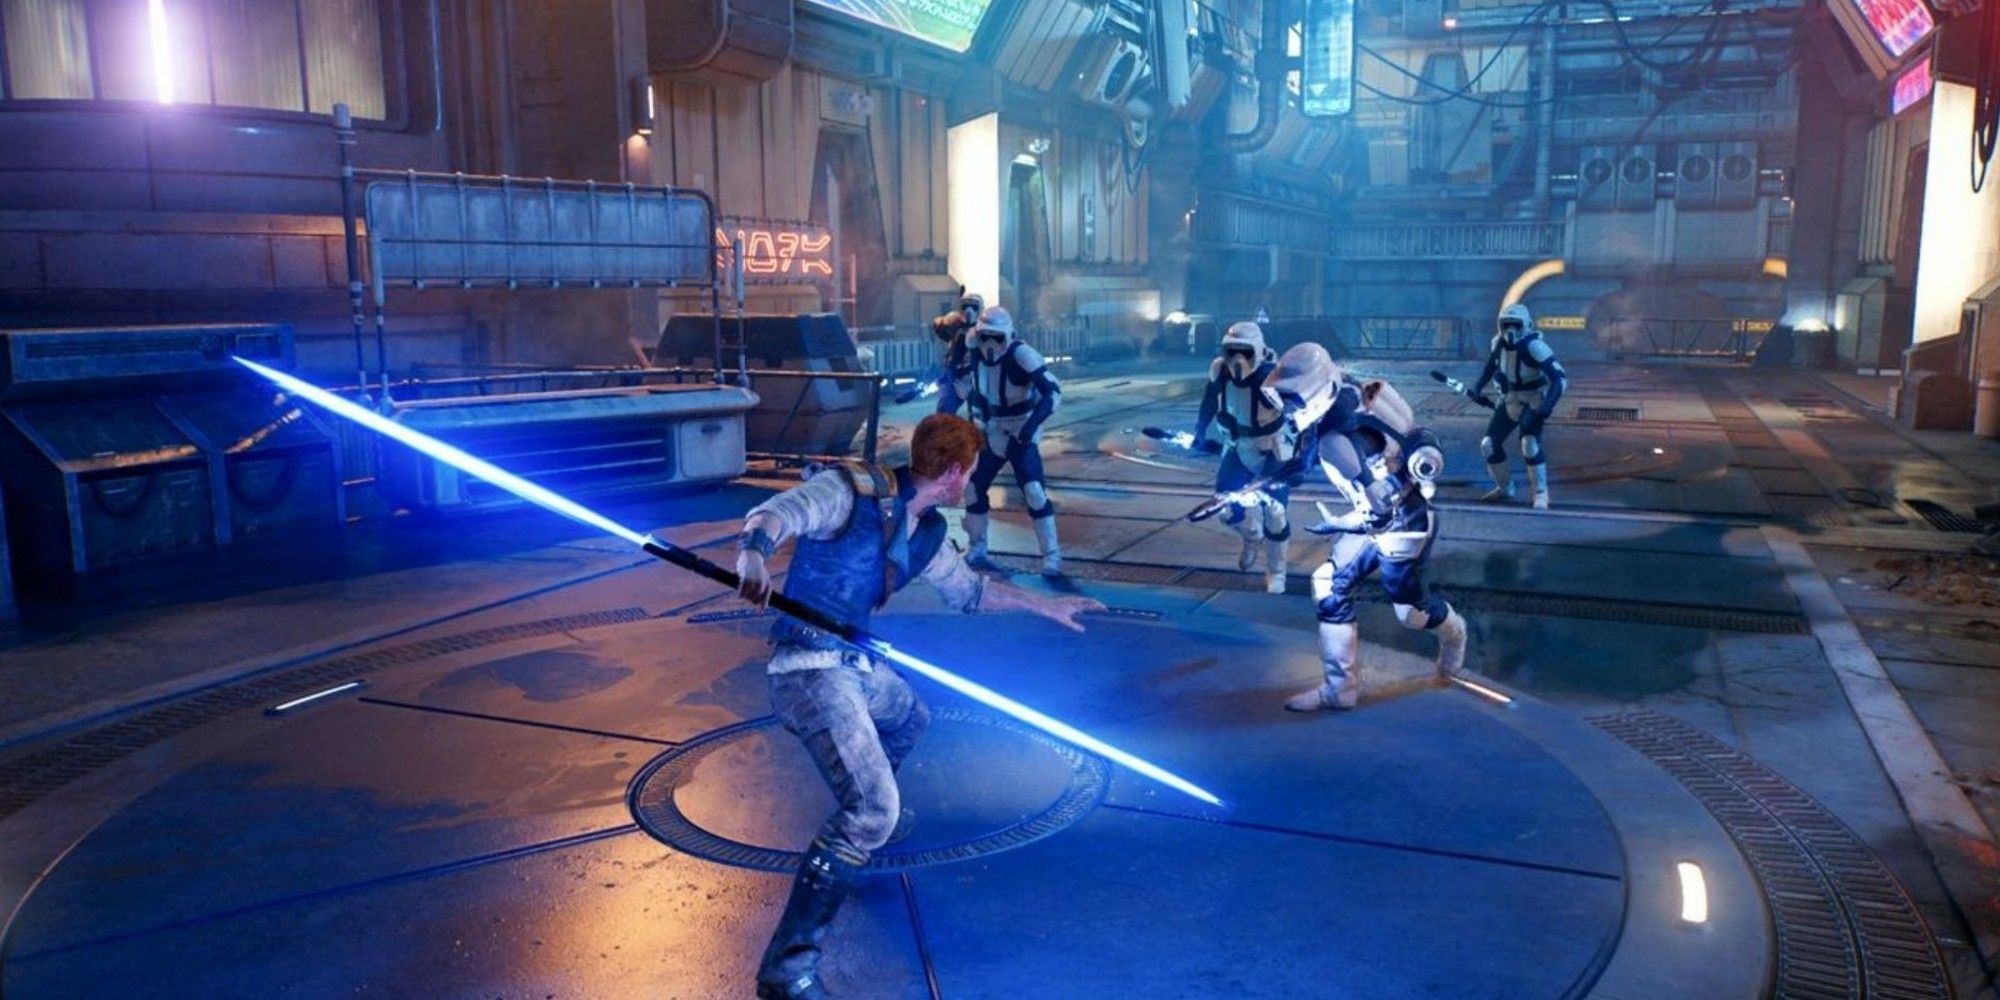 cal using a blue double-blade lightsaber against the empire